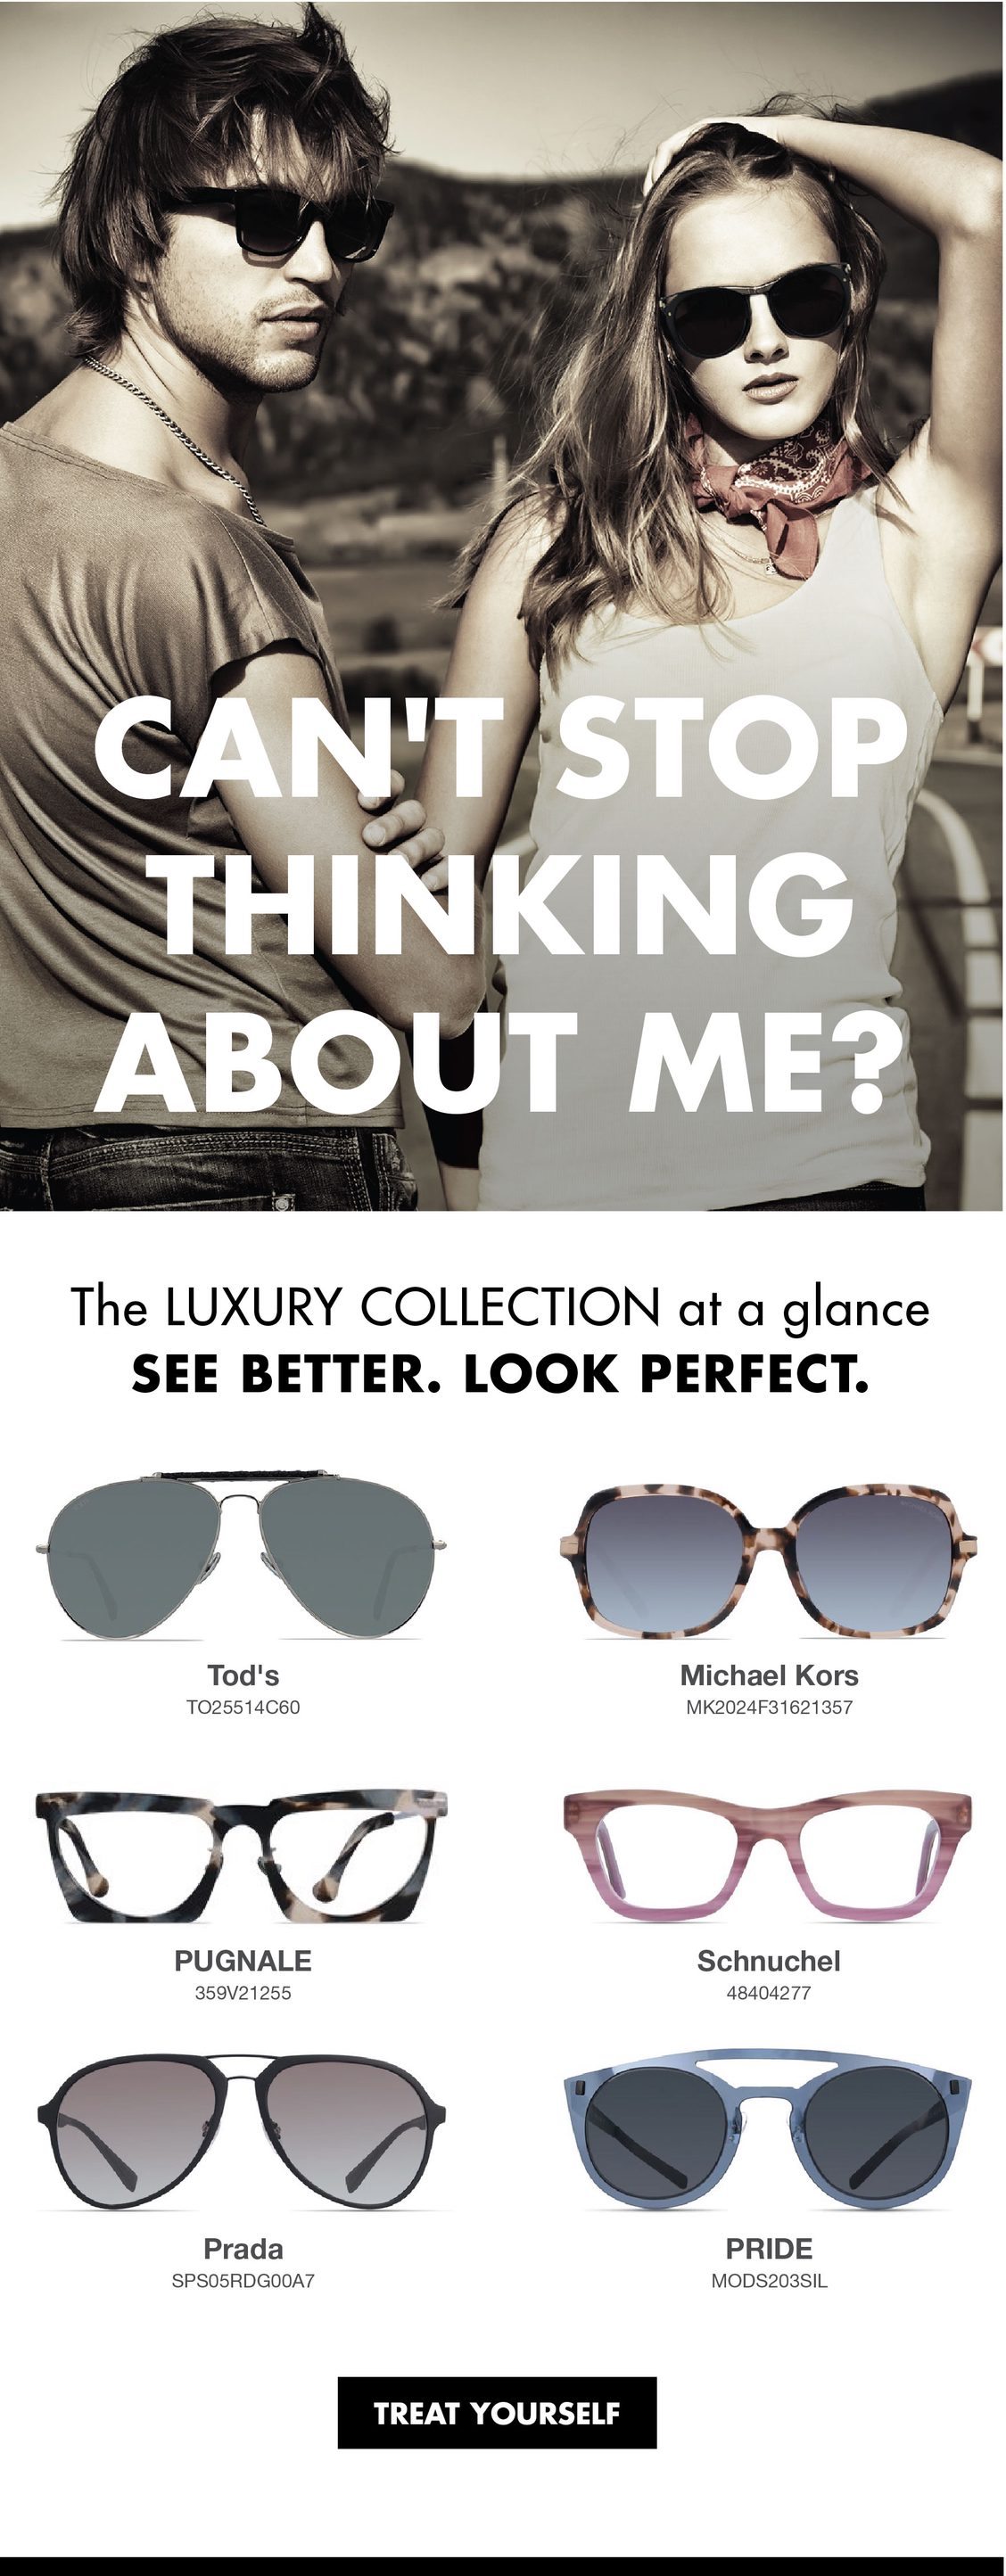 THE LUXURY COLLECTION AT A GLANCE - 25% OFF PRESCRIPTION EYEGLASSES - GLASSES GALLERY